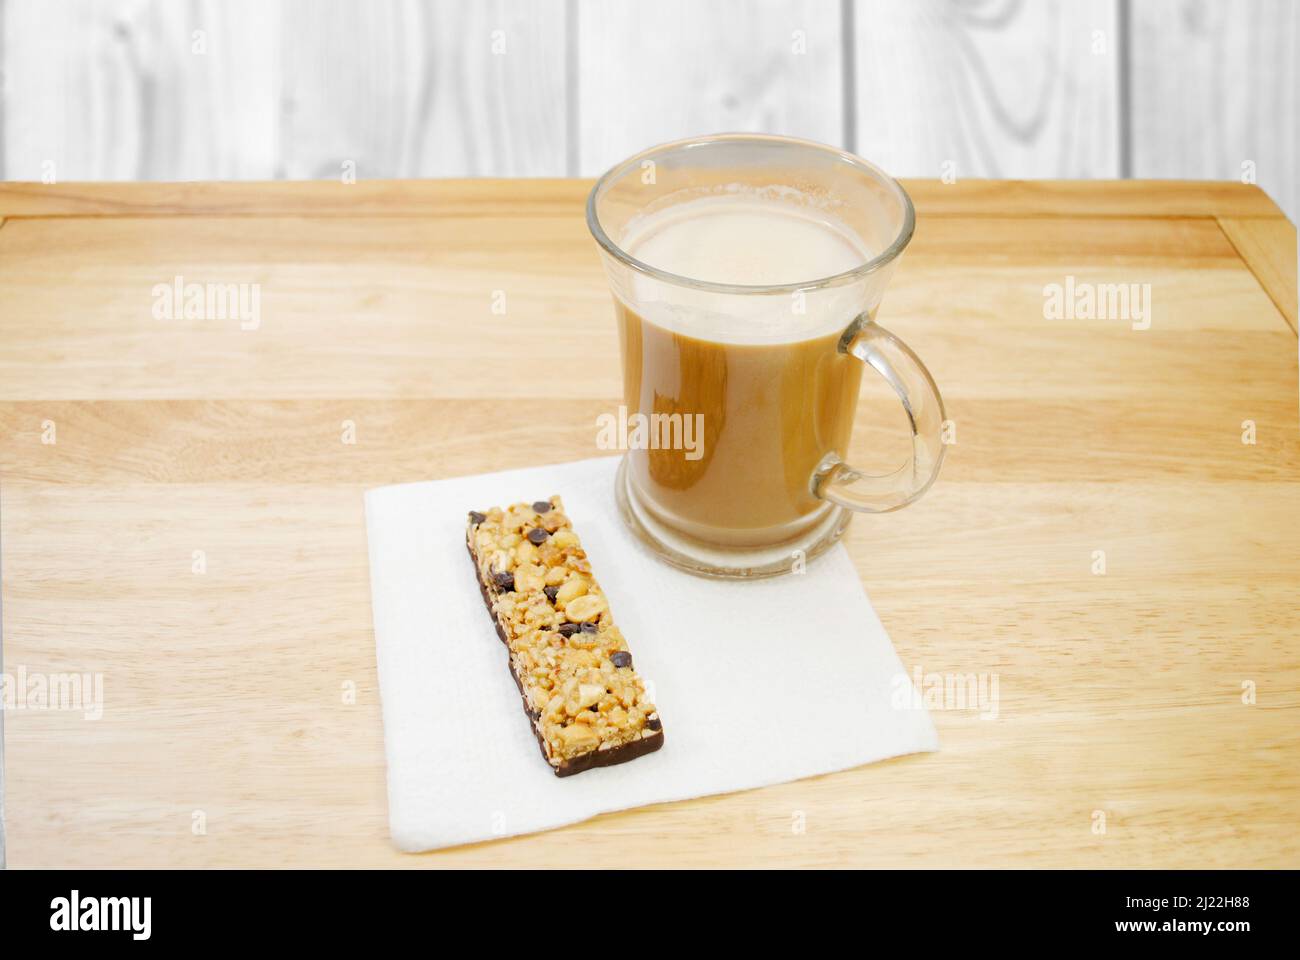 A Chocolate Chip Granola Bar with a Cup of Coffee for Breakfast Stock Photo